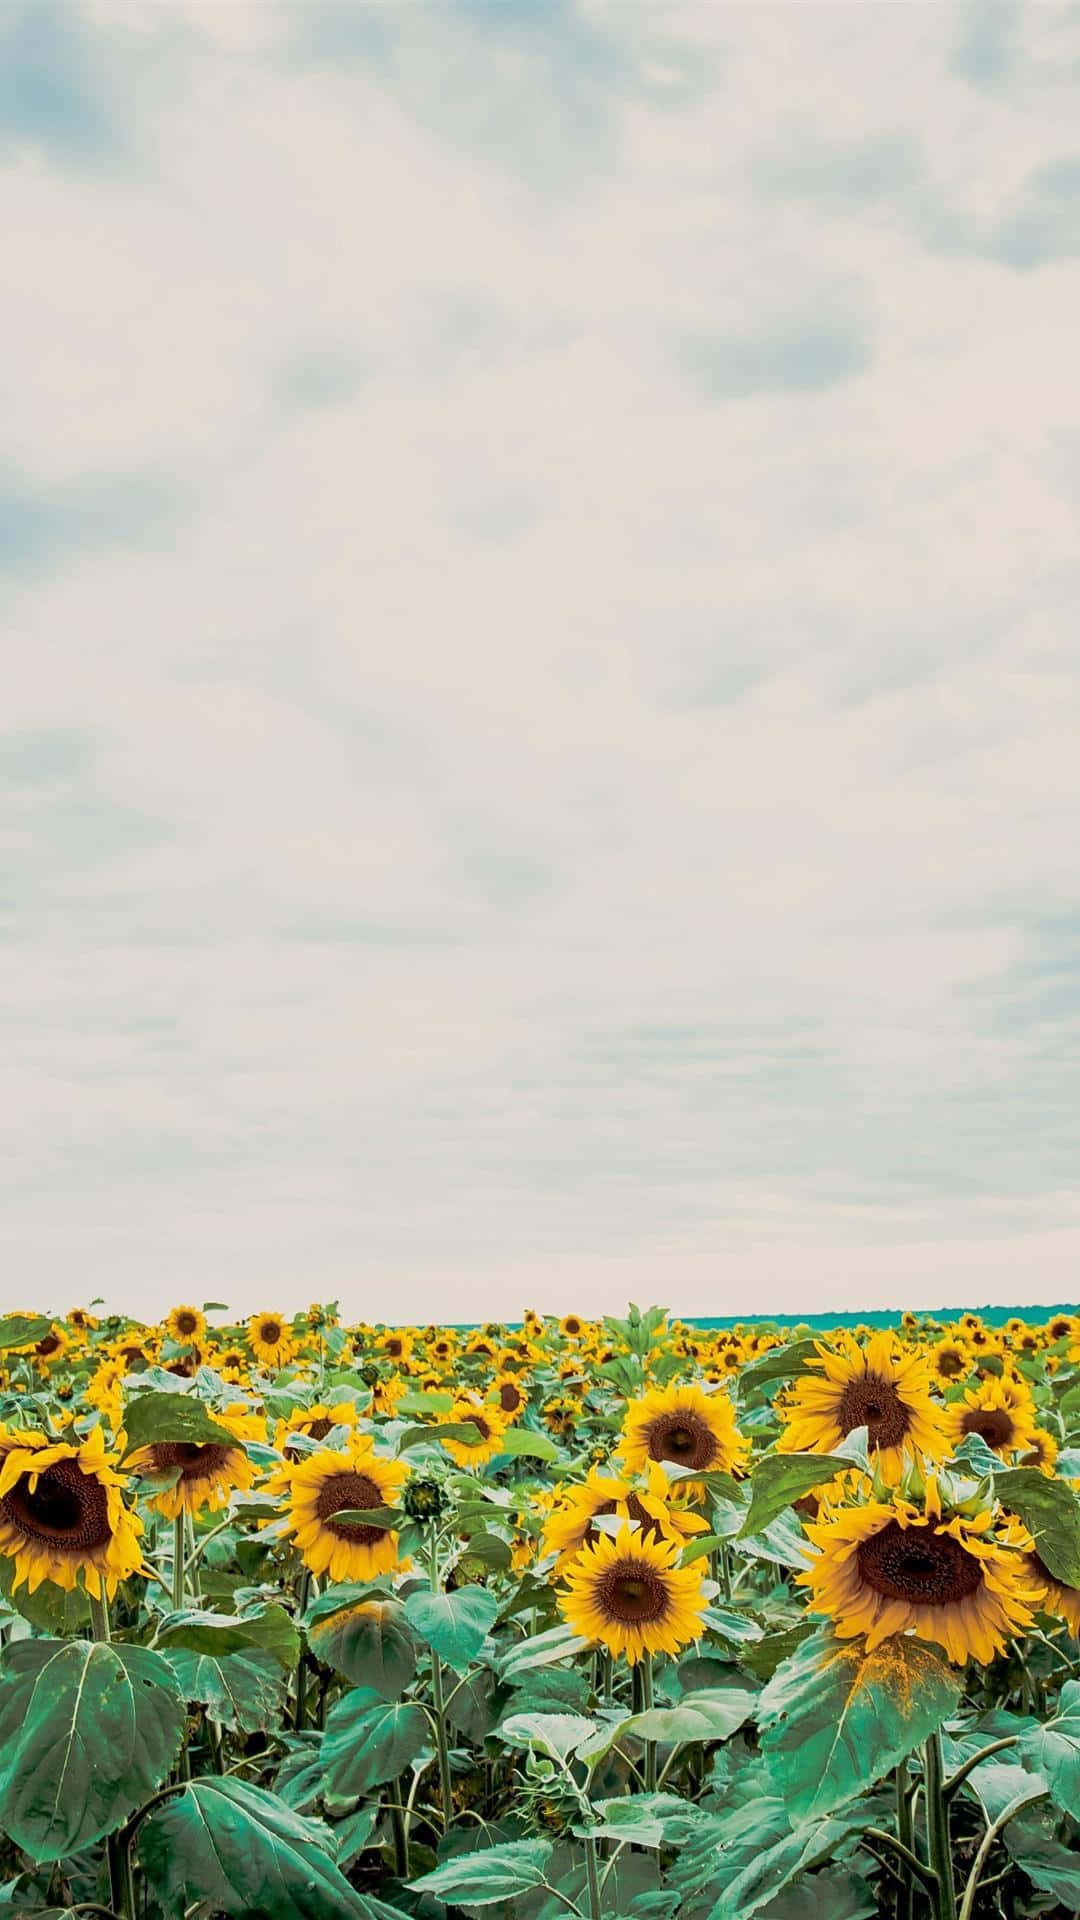 Brighten your day with this sunshine-inspired sunflower aesthetic iPhone wallpaper Wallpaper